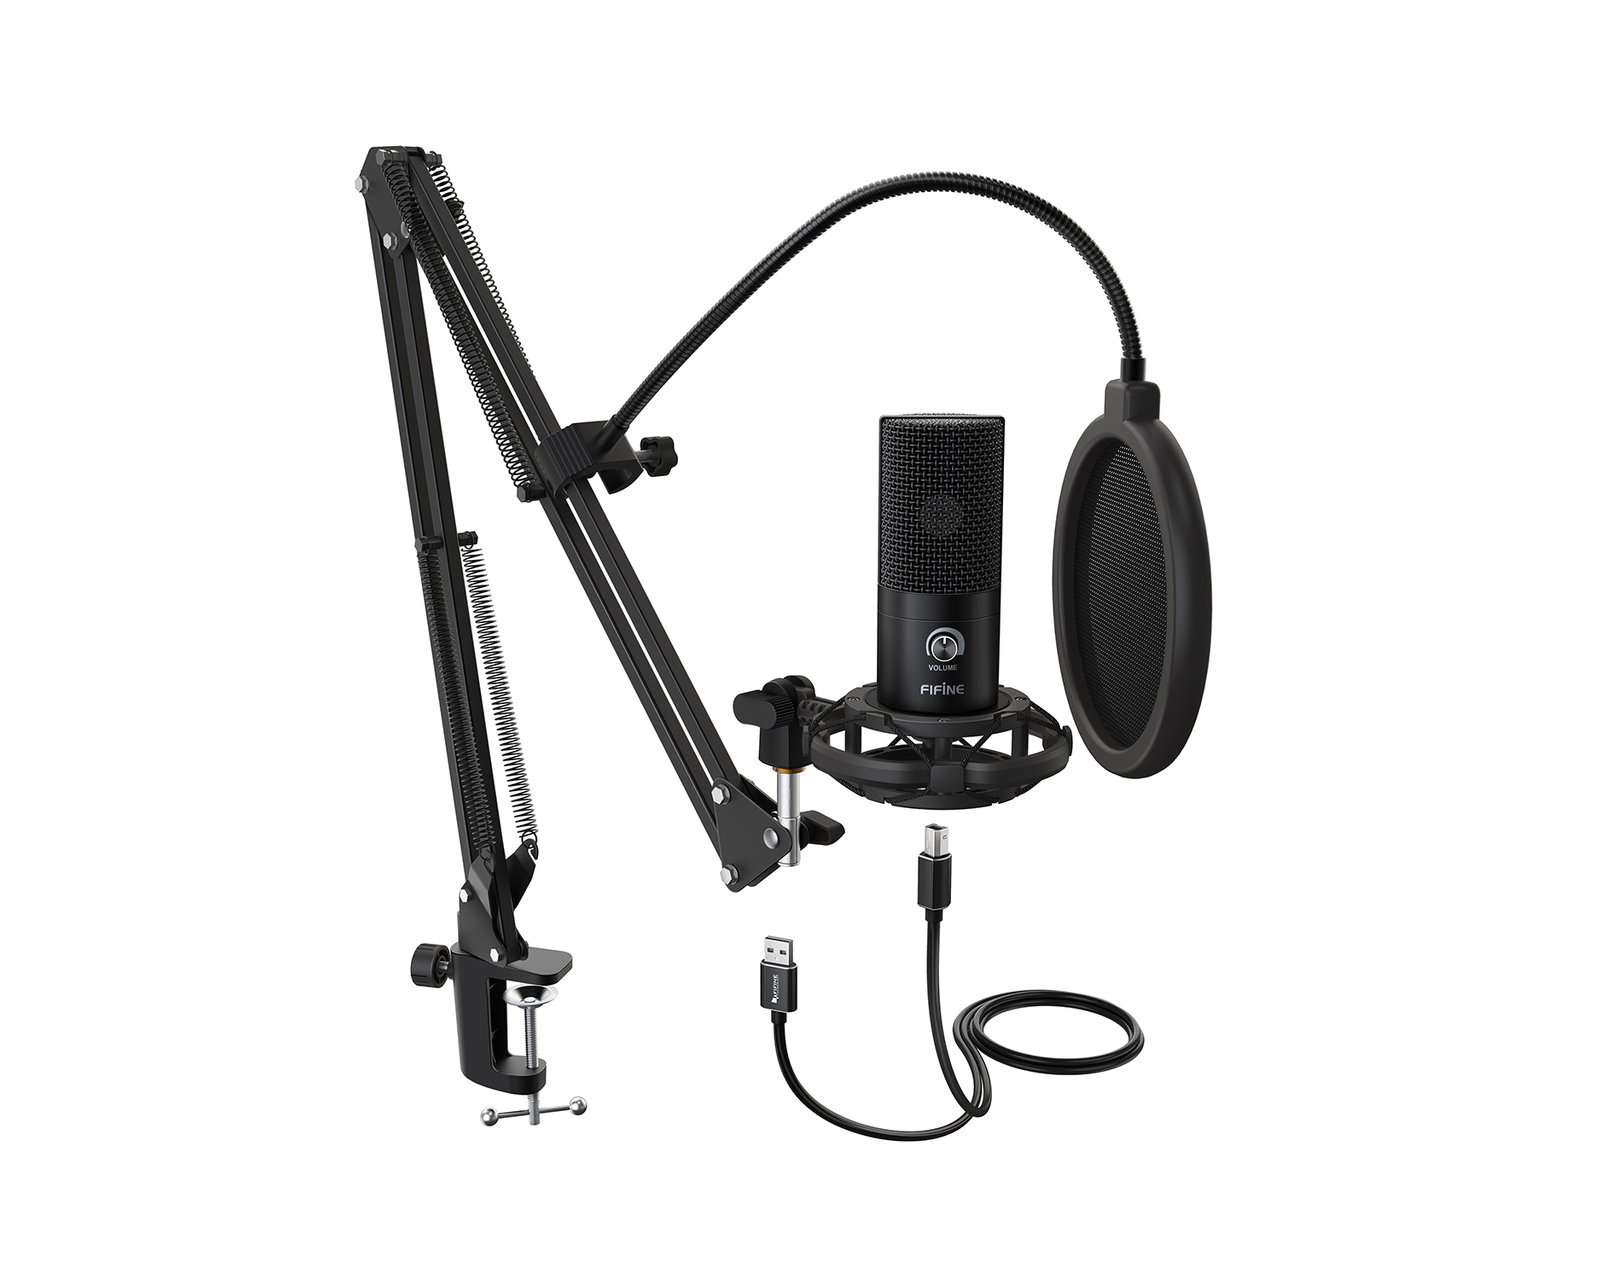 Fifine K688: the Best Budget Microphone for Podcasting – DIY Video Studio